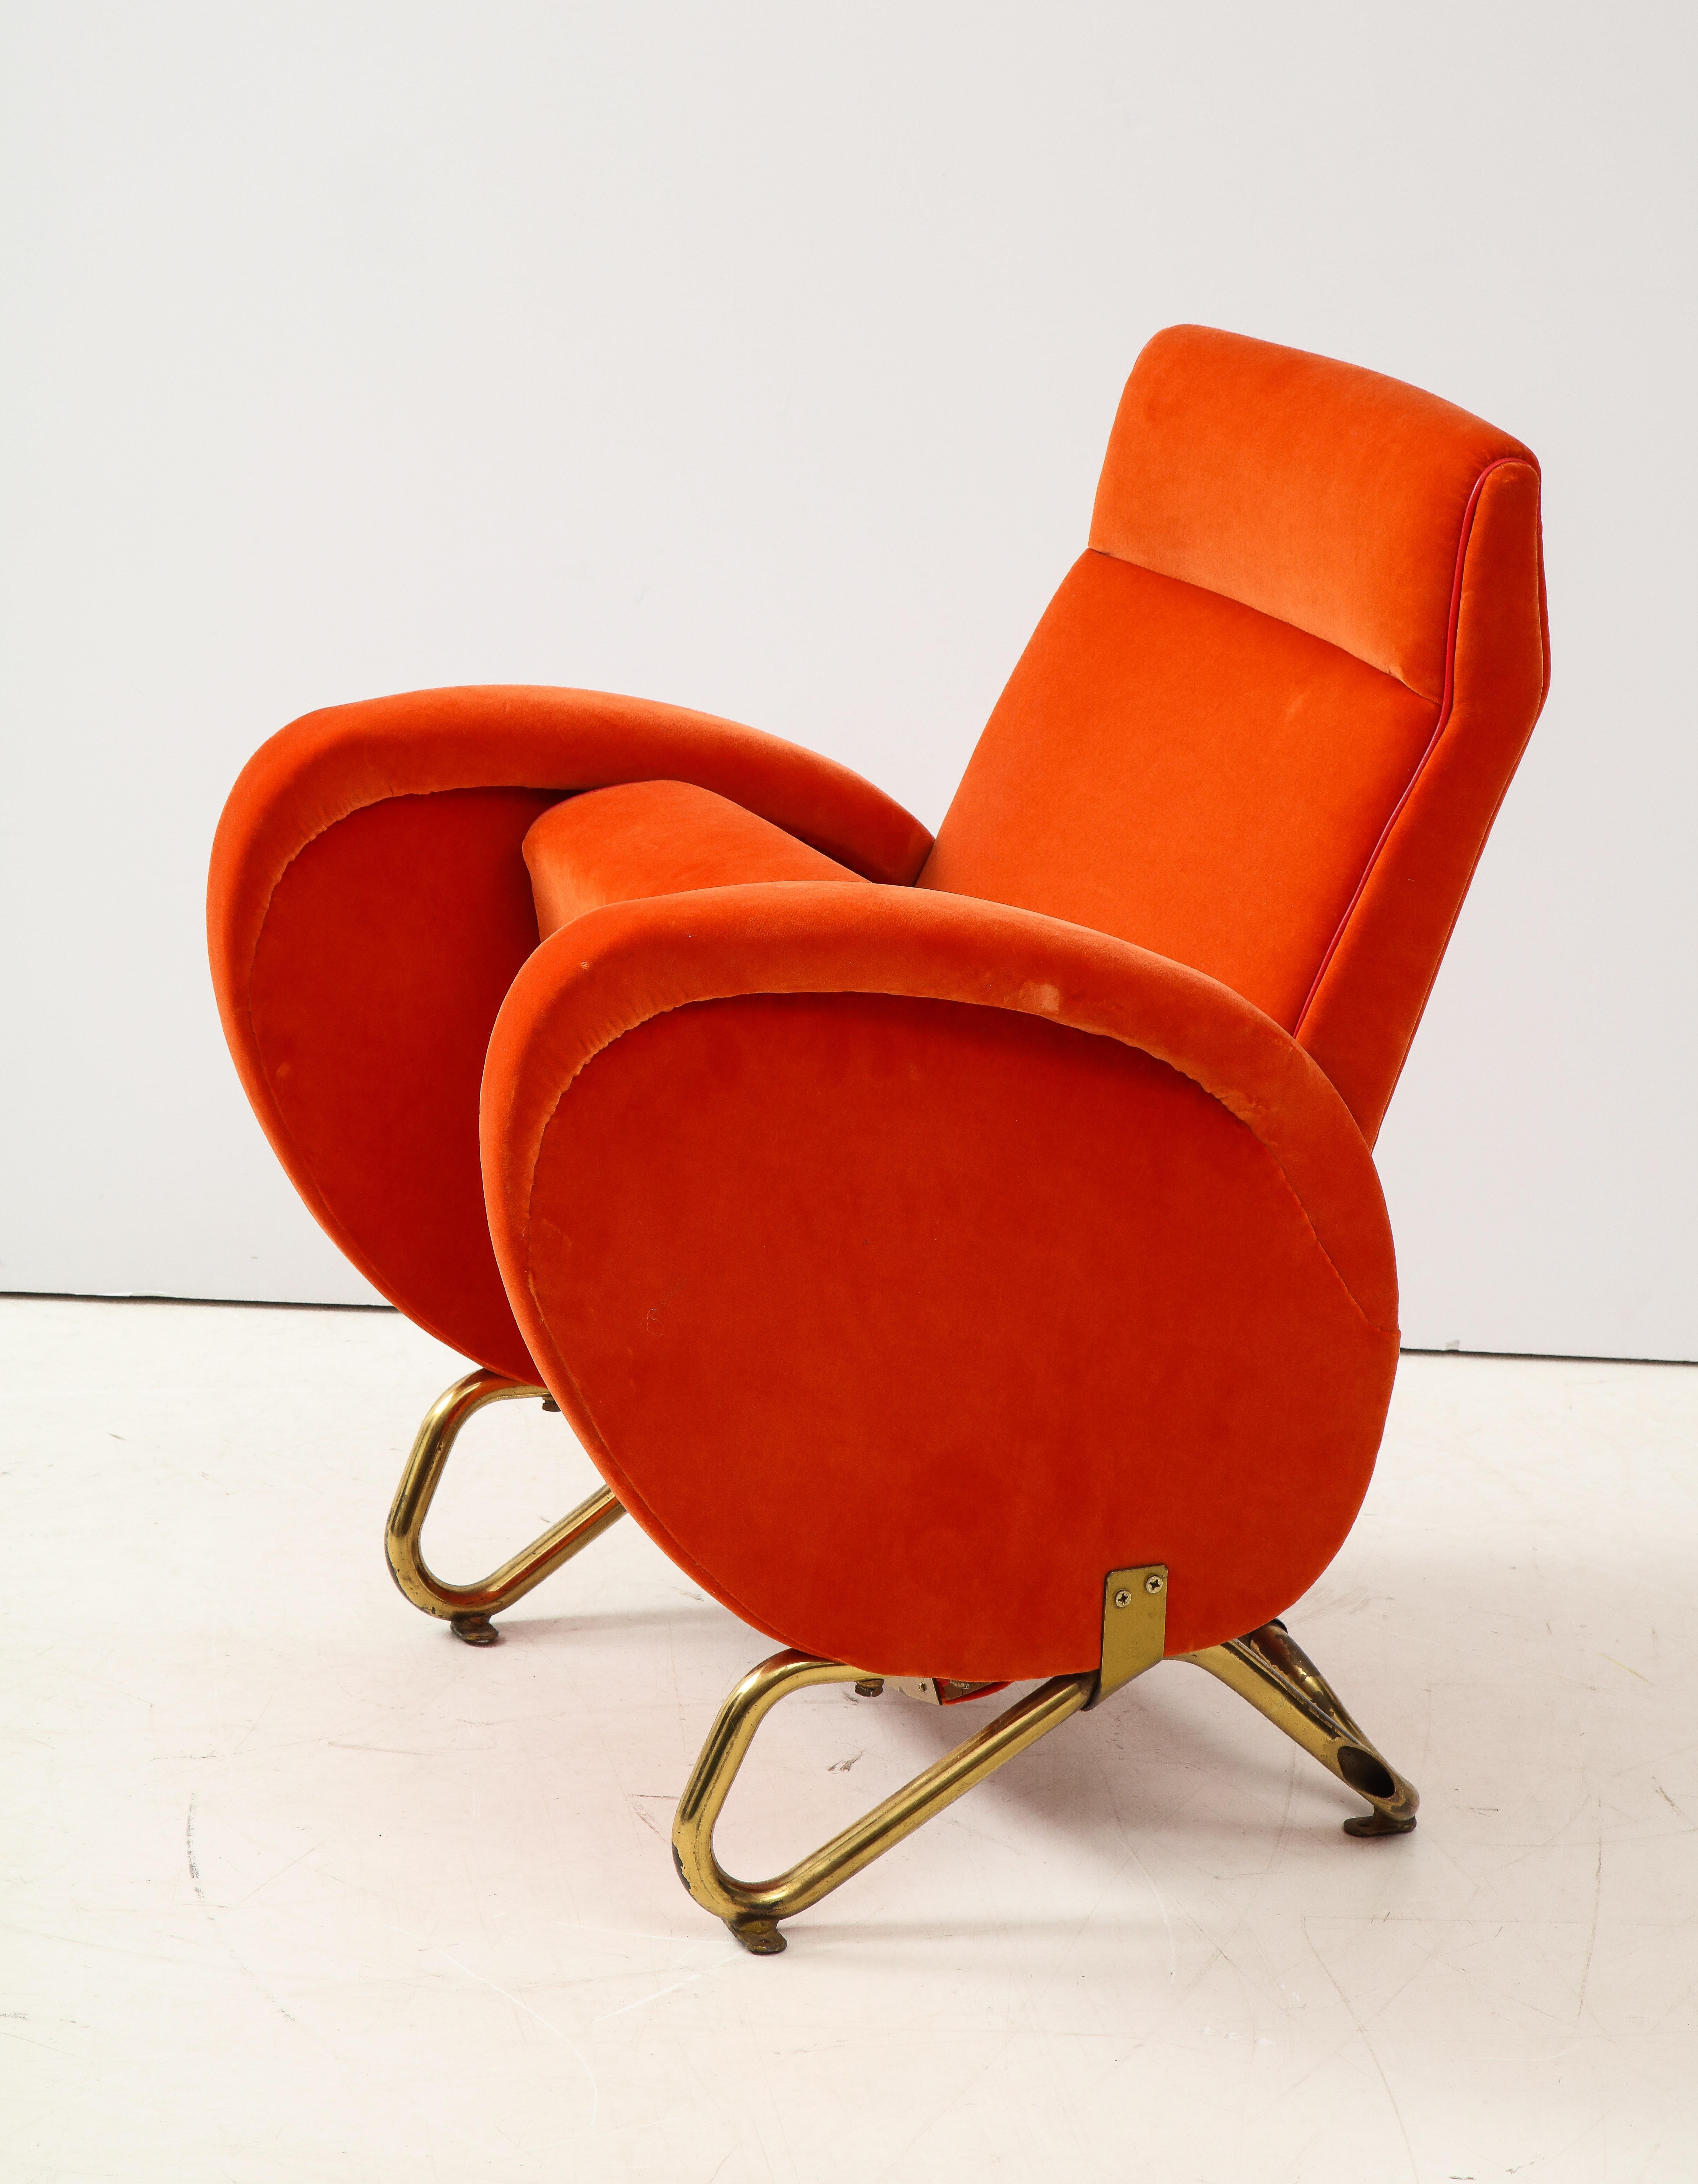 Carlo Mollino, Brass and Velvet Armchair from the RAI Auditorium, Italy, c. 1951 For Sale 2